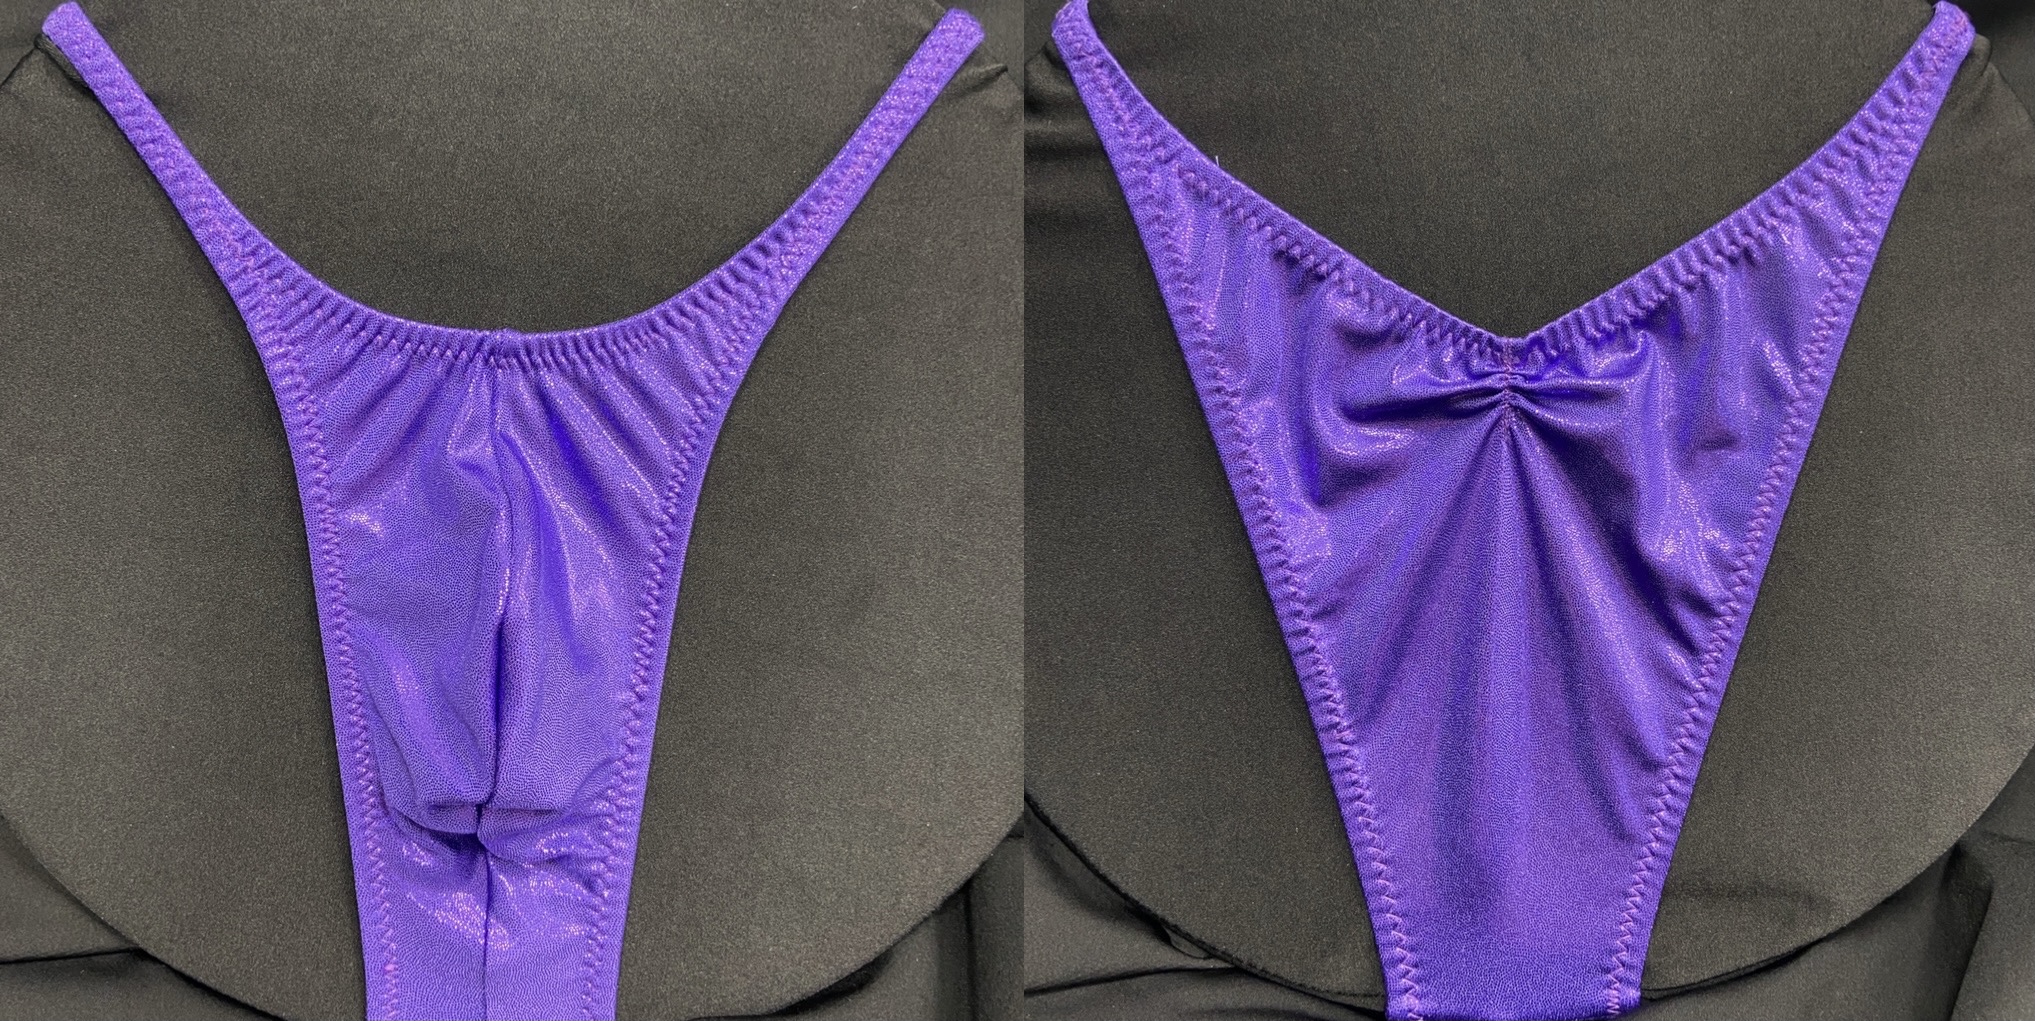 Purple wetlook fabric
Pro Cut 
available in S,M,L,XL
back gathers optional
$65